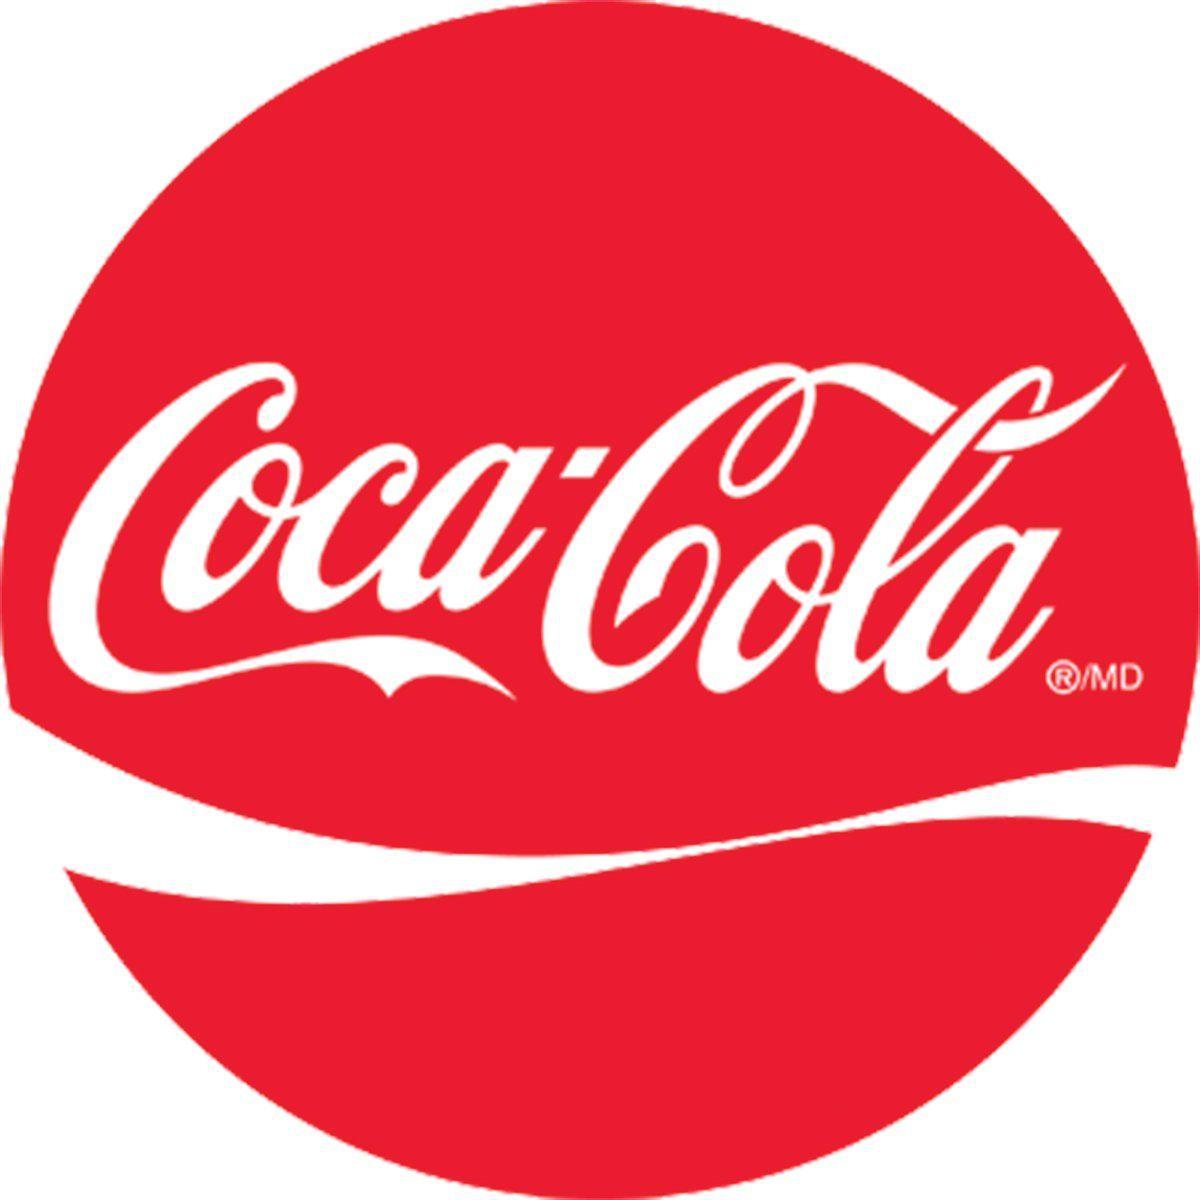 Soda Brand Logo - You Like Your Logo, but Do Your Consumers? | Agency News - Ad Age